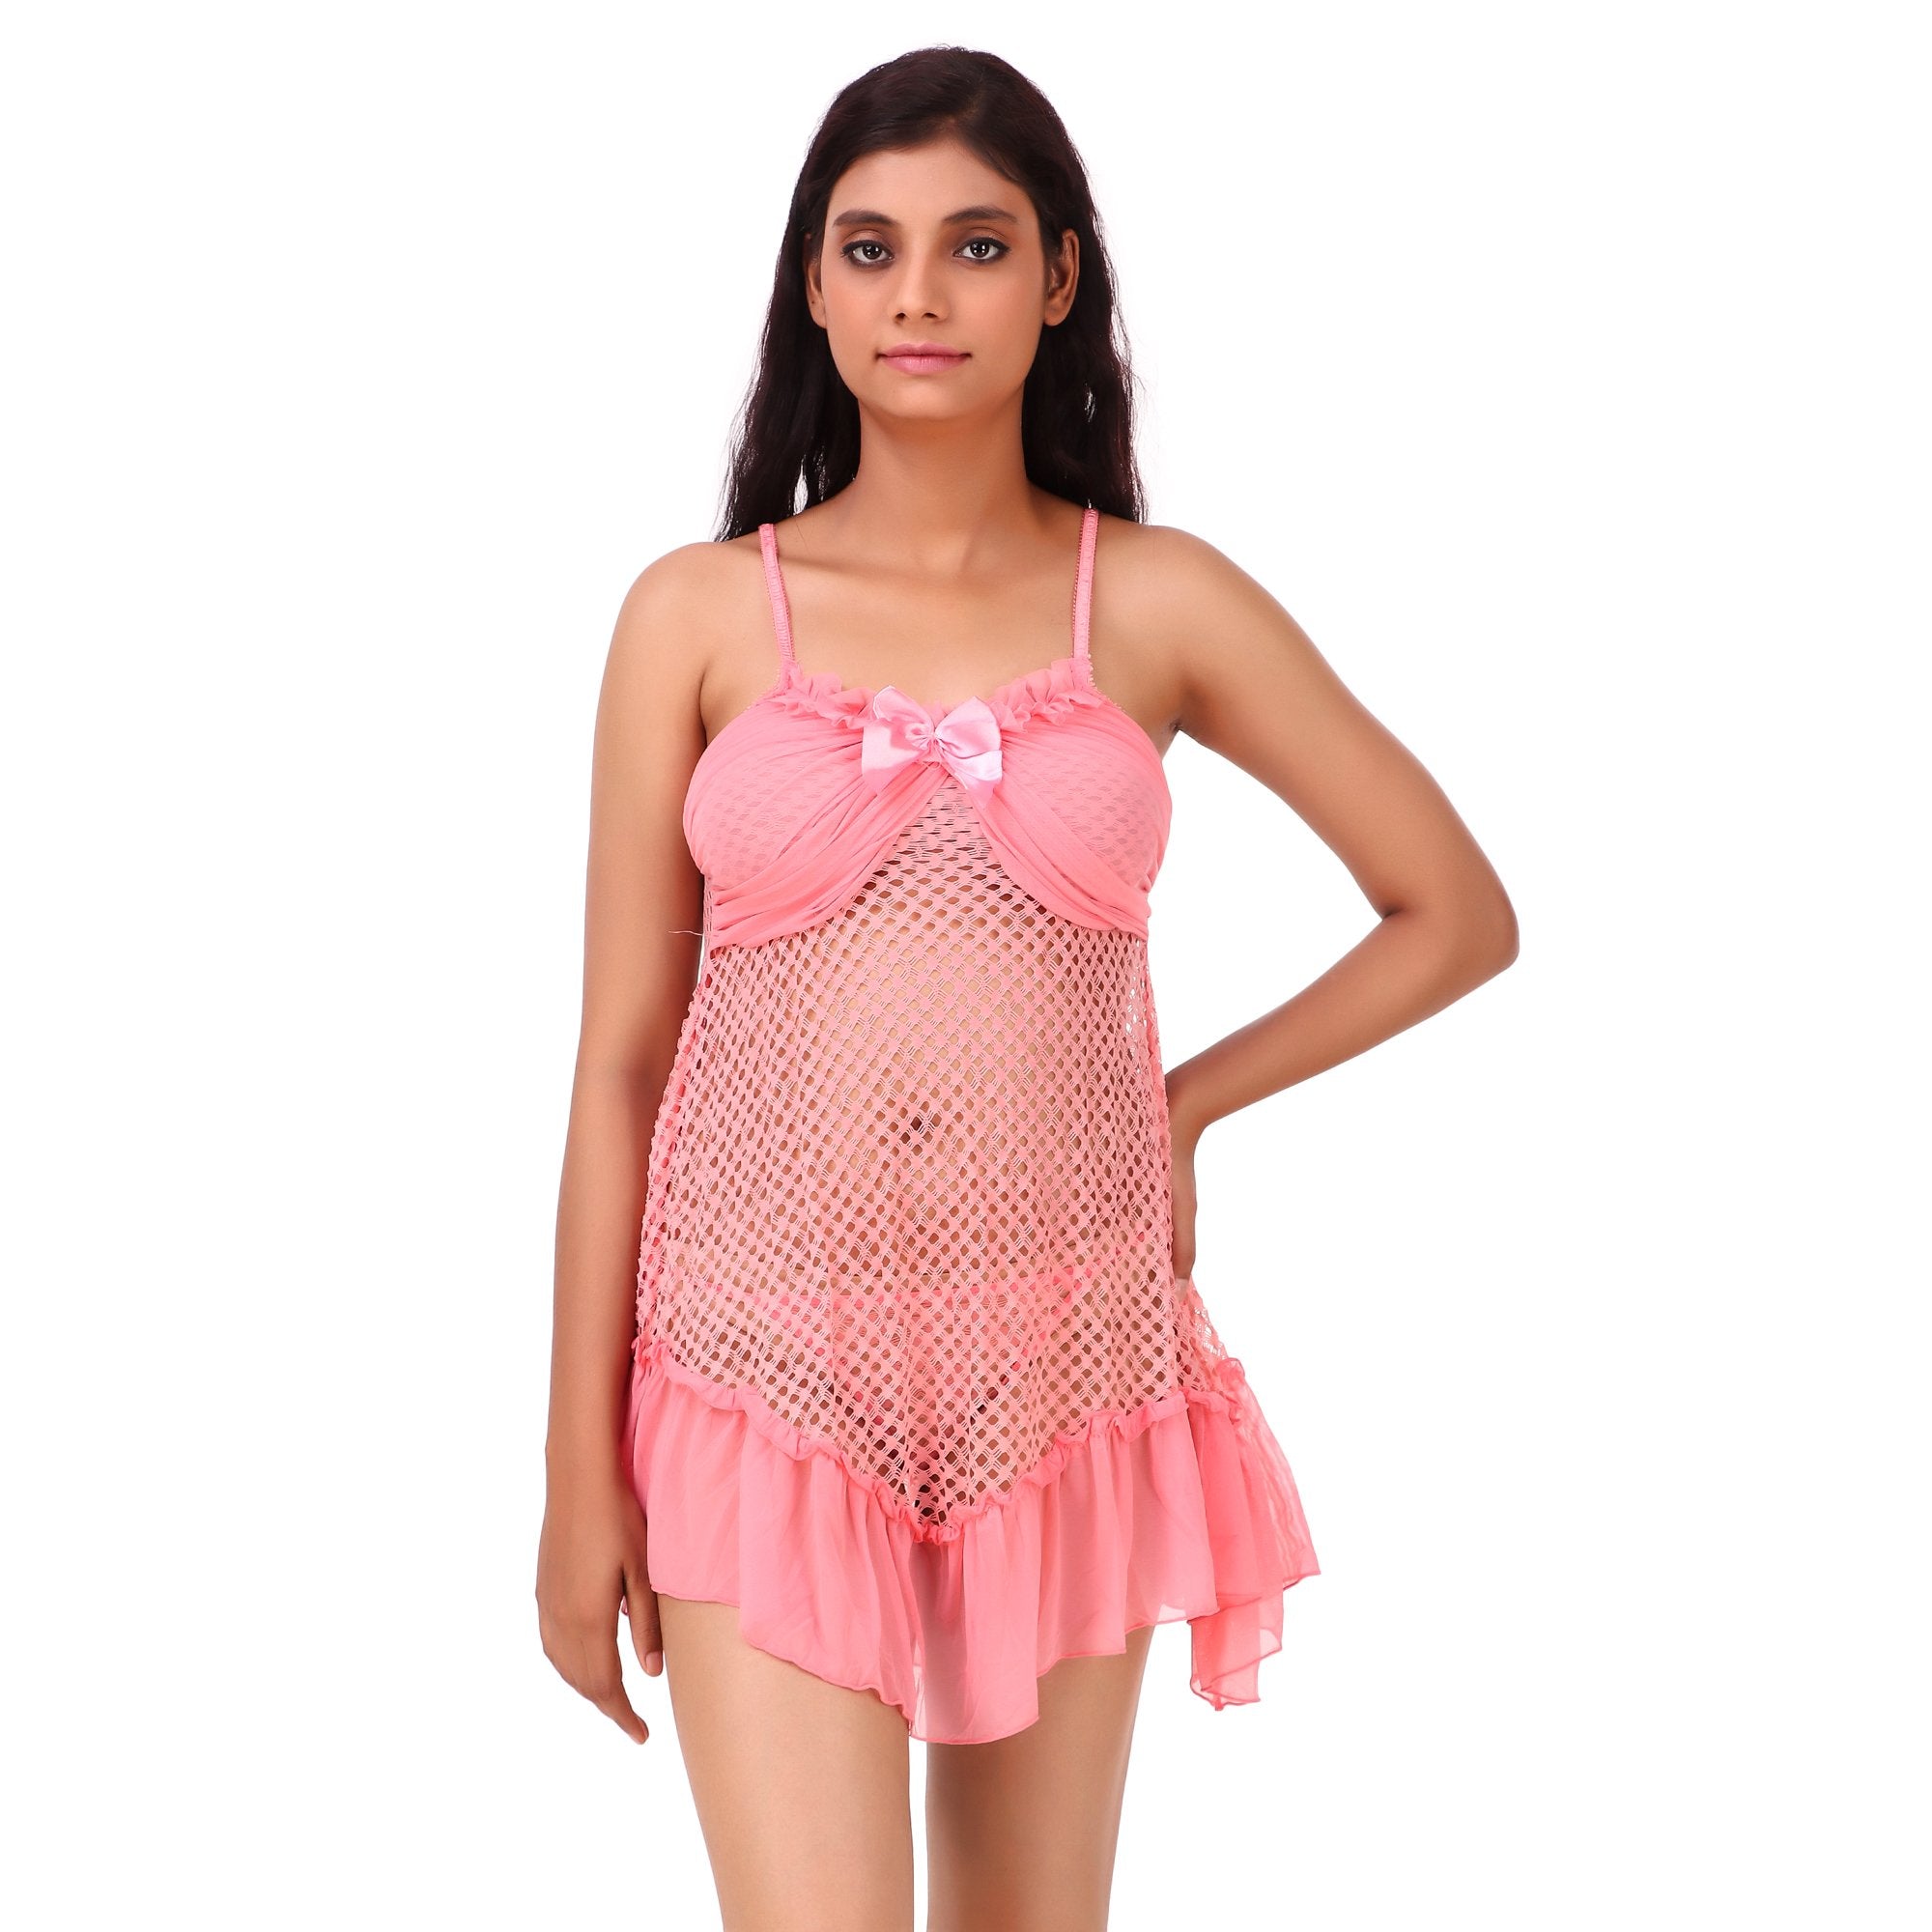 AXTZH-XNTS032 Lace Sheer Baby doll With Matching Thong